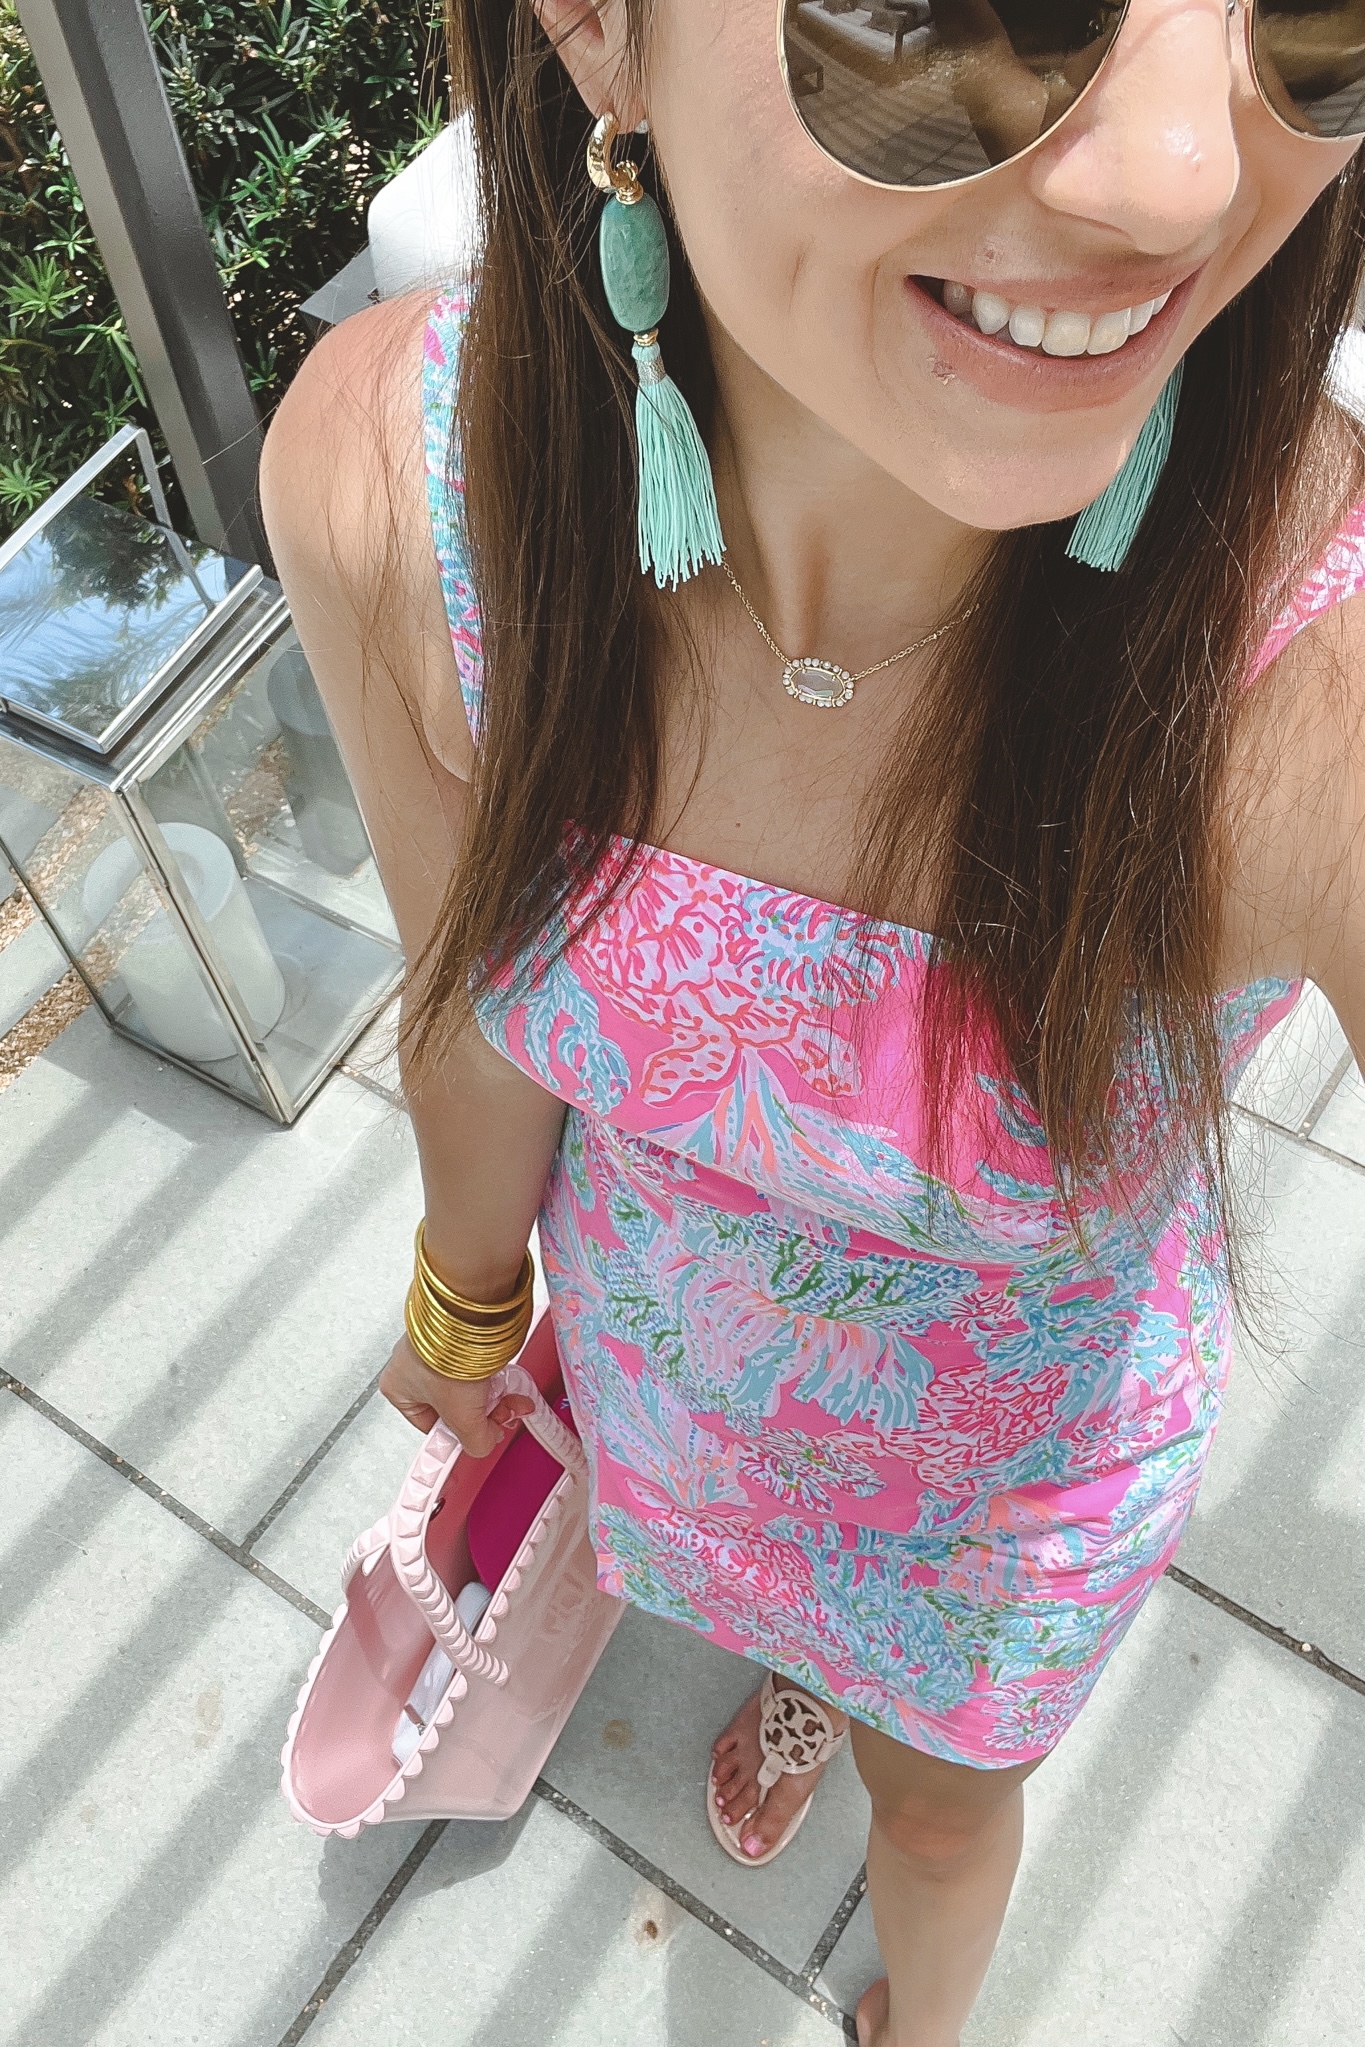 kendra scott insley teal earrings with elisa necklace and lilly pulitzer lawless romper